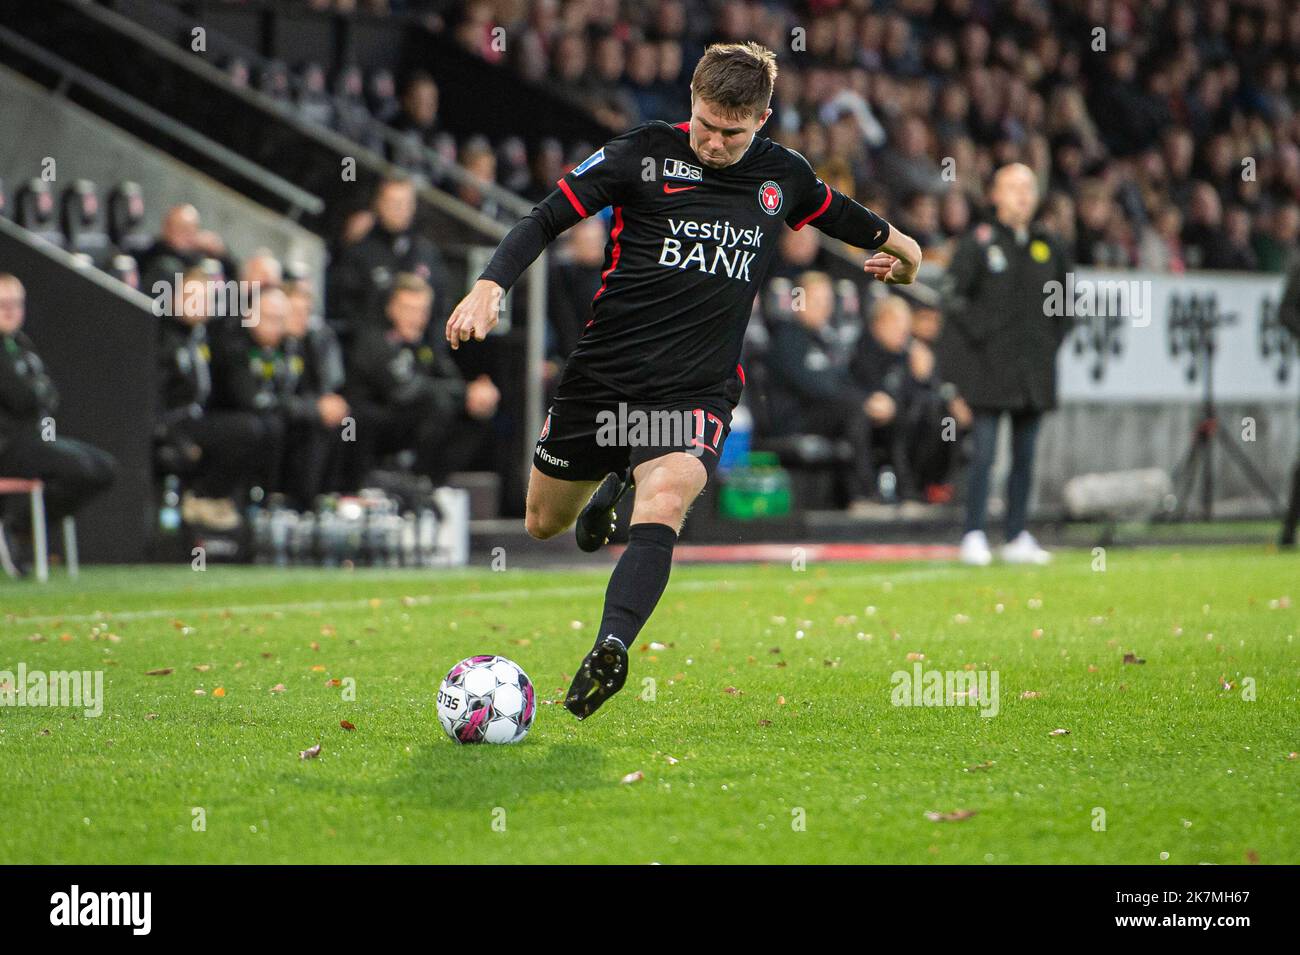 Herning, Denmark. 16th, October 2022. Mads Dohr Thychosen (17) of FC Midtjylland seen during the 3F Superliga match between FC and AC Horsens at MCH Arena Herning. (Photo credit: Gonzales